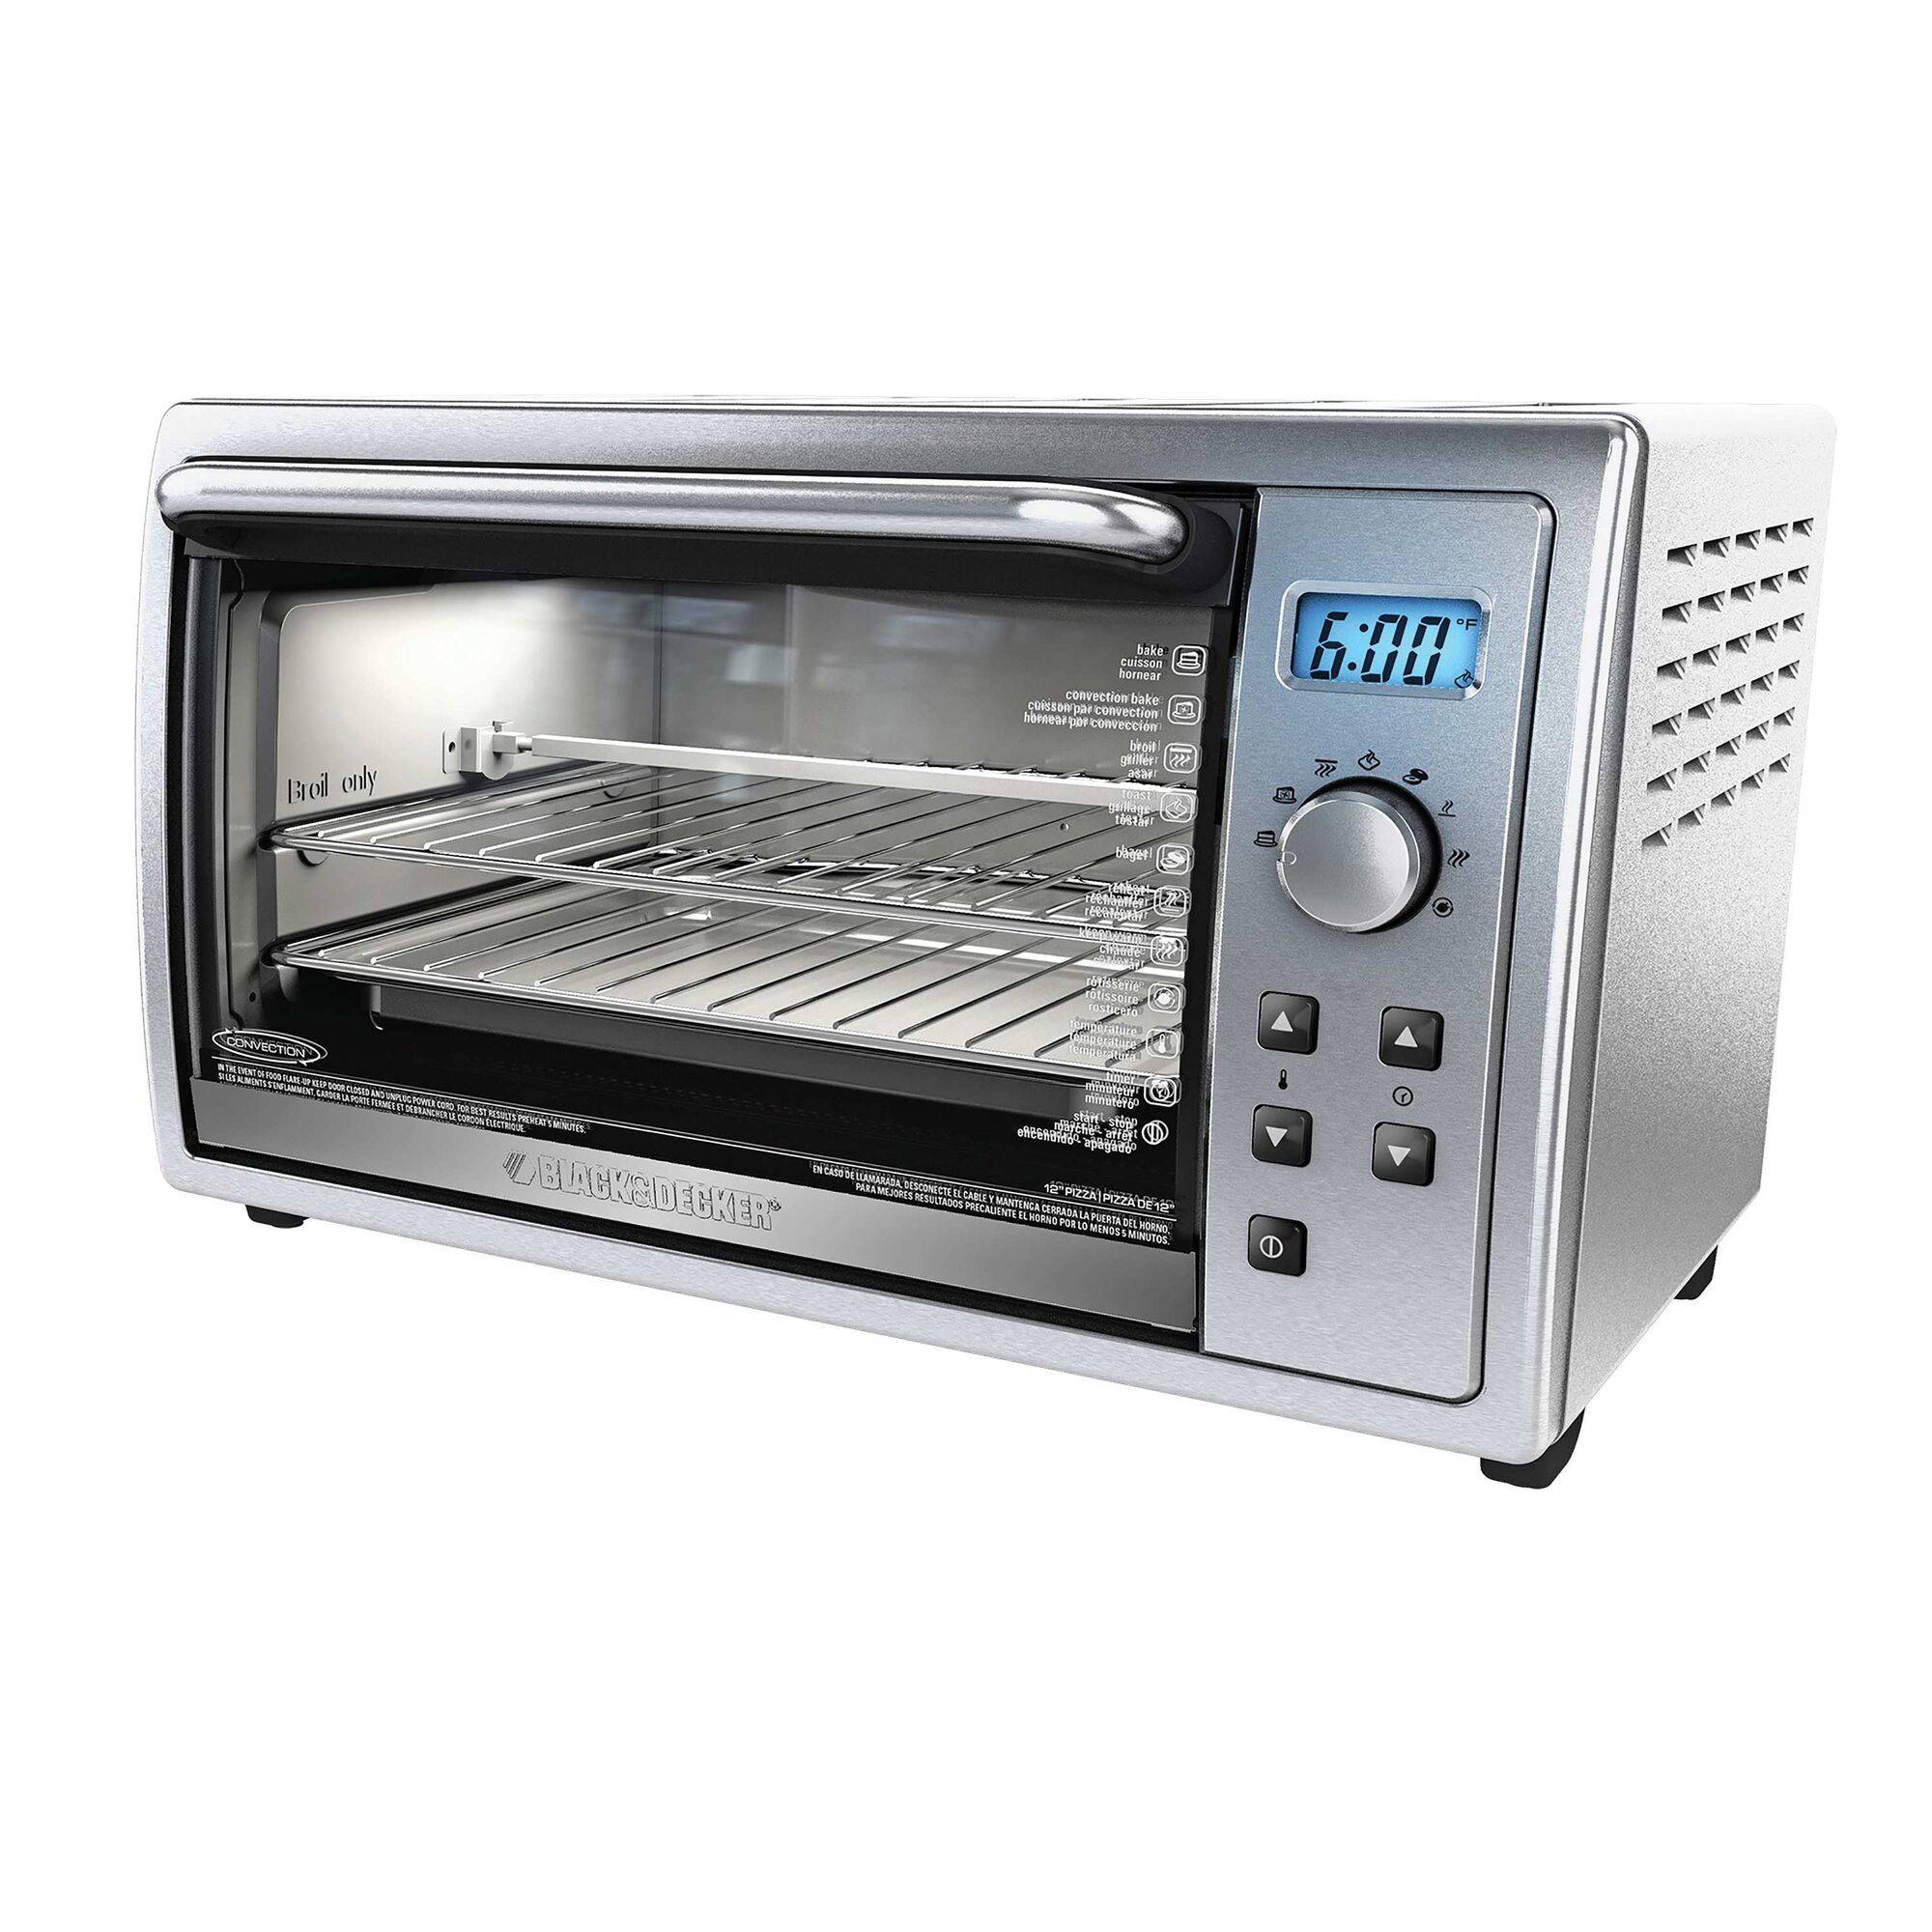 Profile of 6 slice digital convection oven with rotisserie.